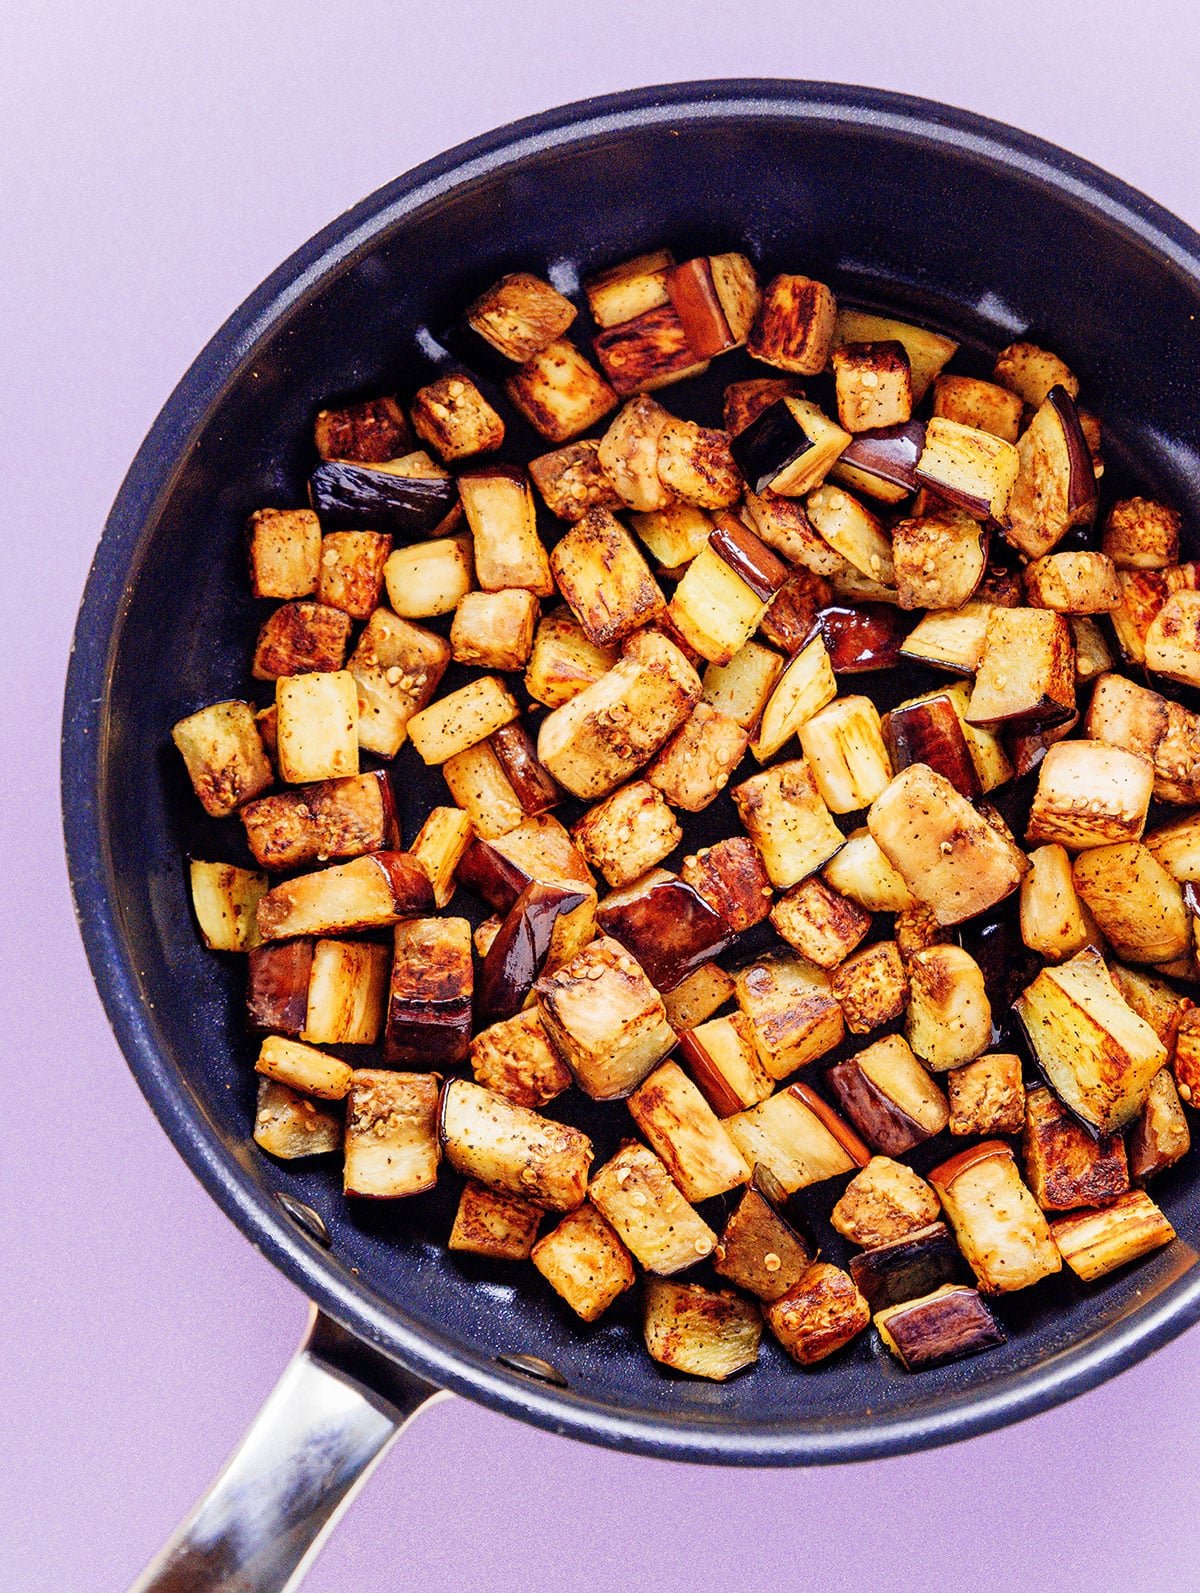 Diced eggplant that is golden brown in a saute pan.